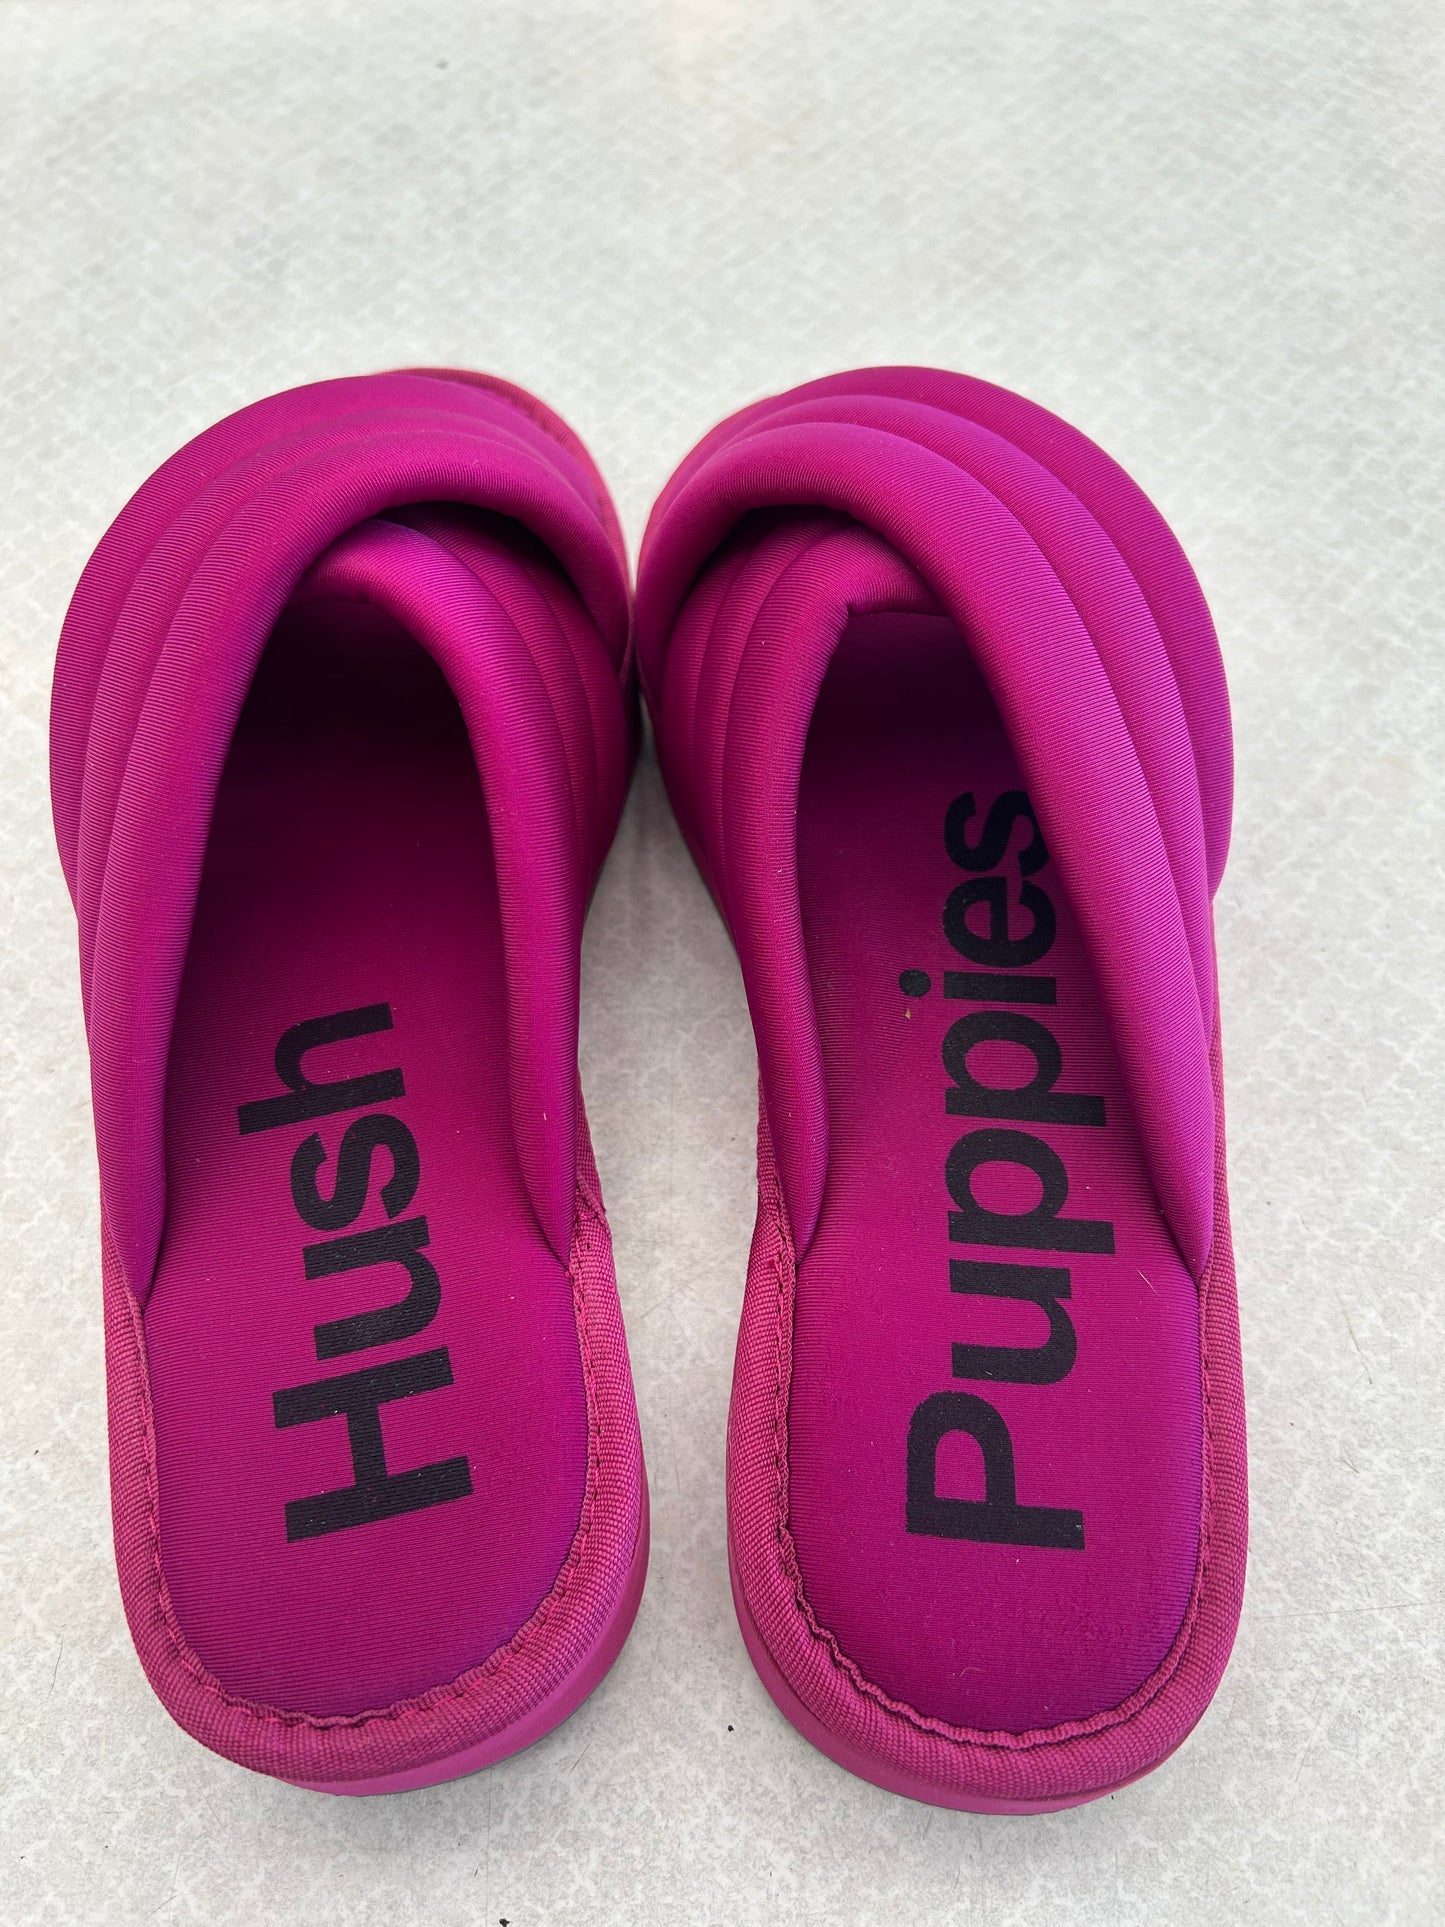 Sandals Flats By Hush Puppies  Size: 10